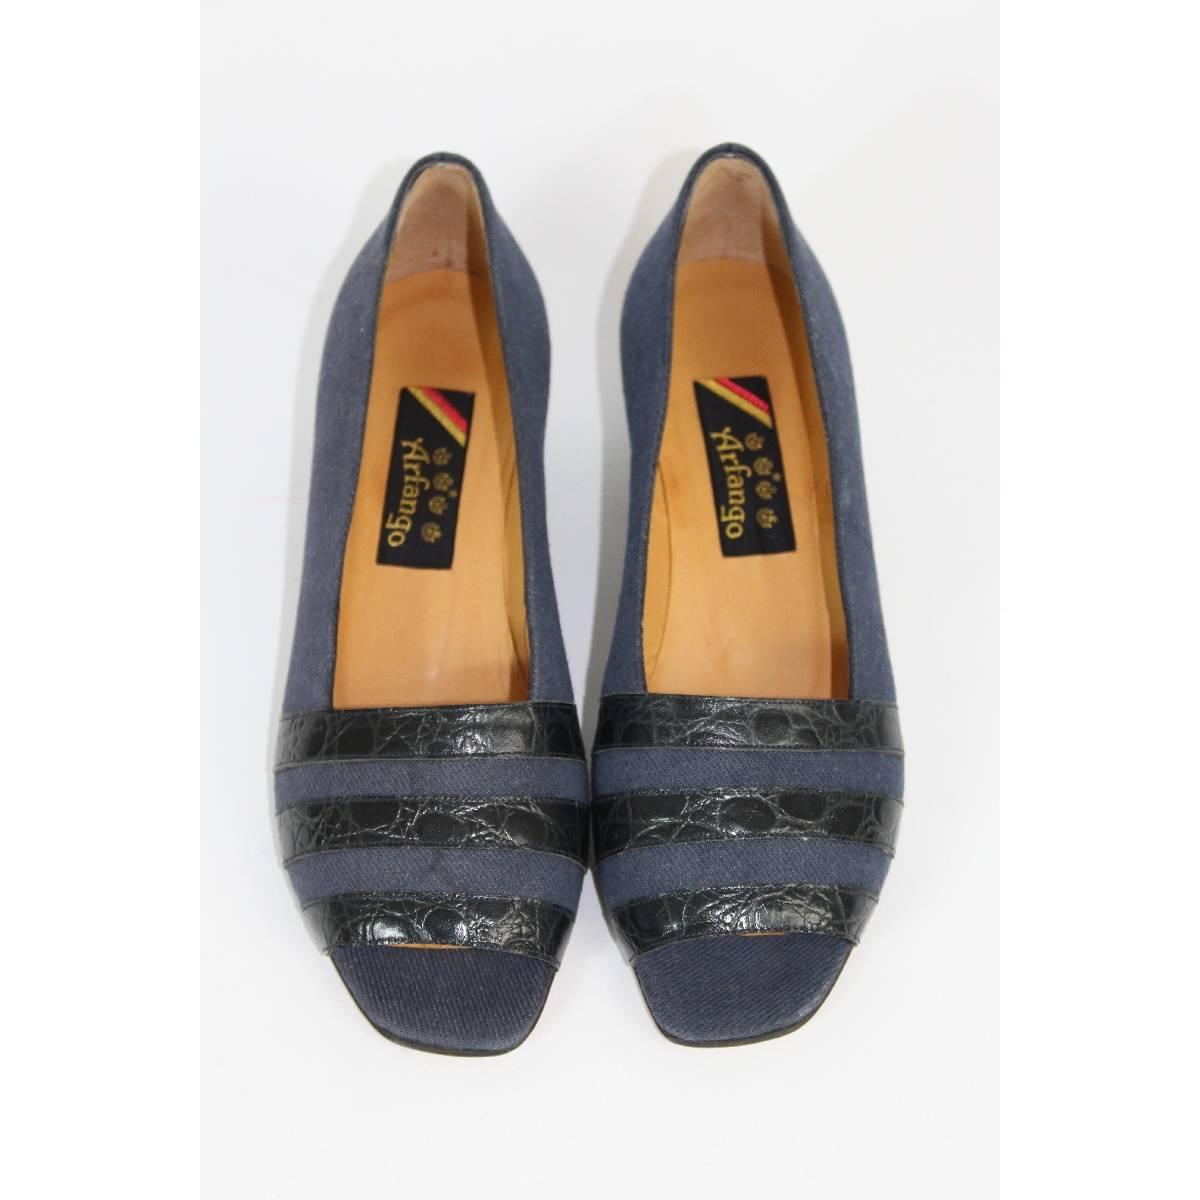 Arfango leather jeans blue shoes size 36 it women's made italy vintage  In New Condition For Sale In Brindisi, IT